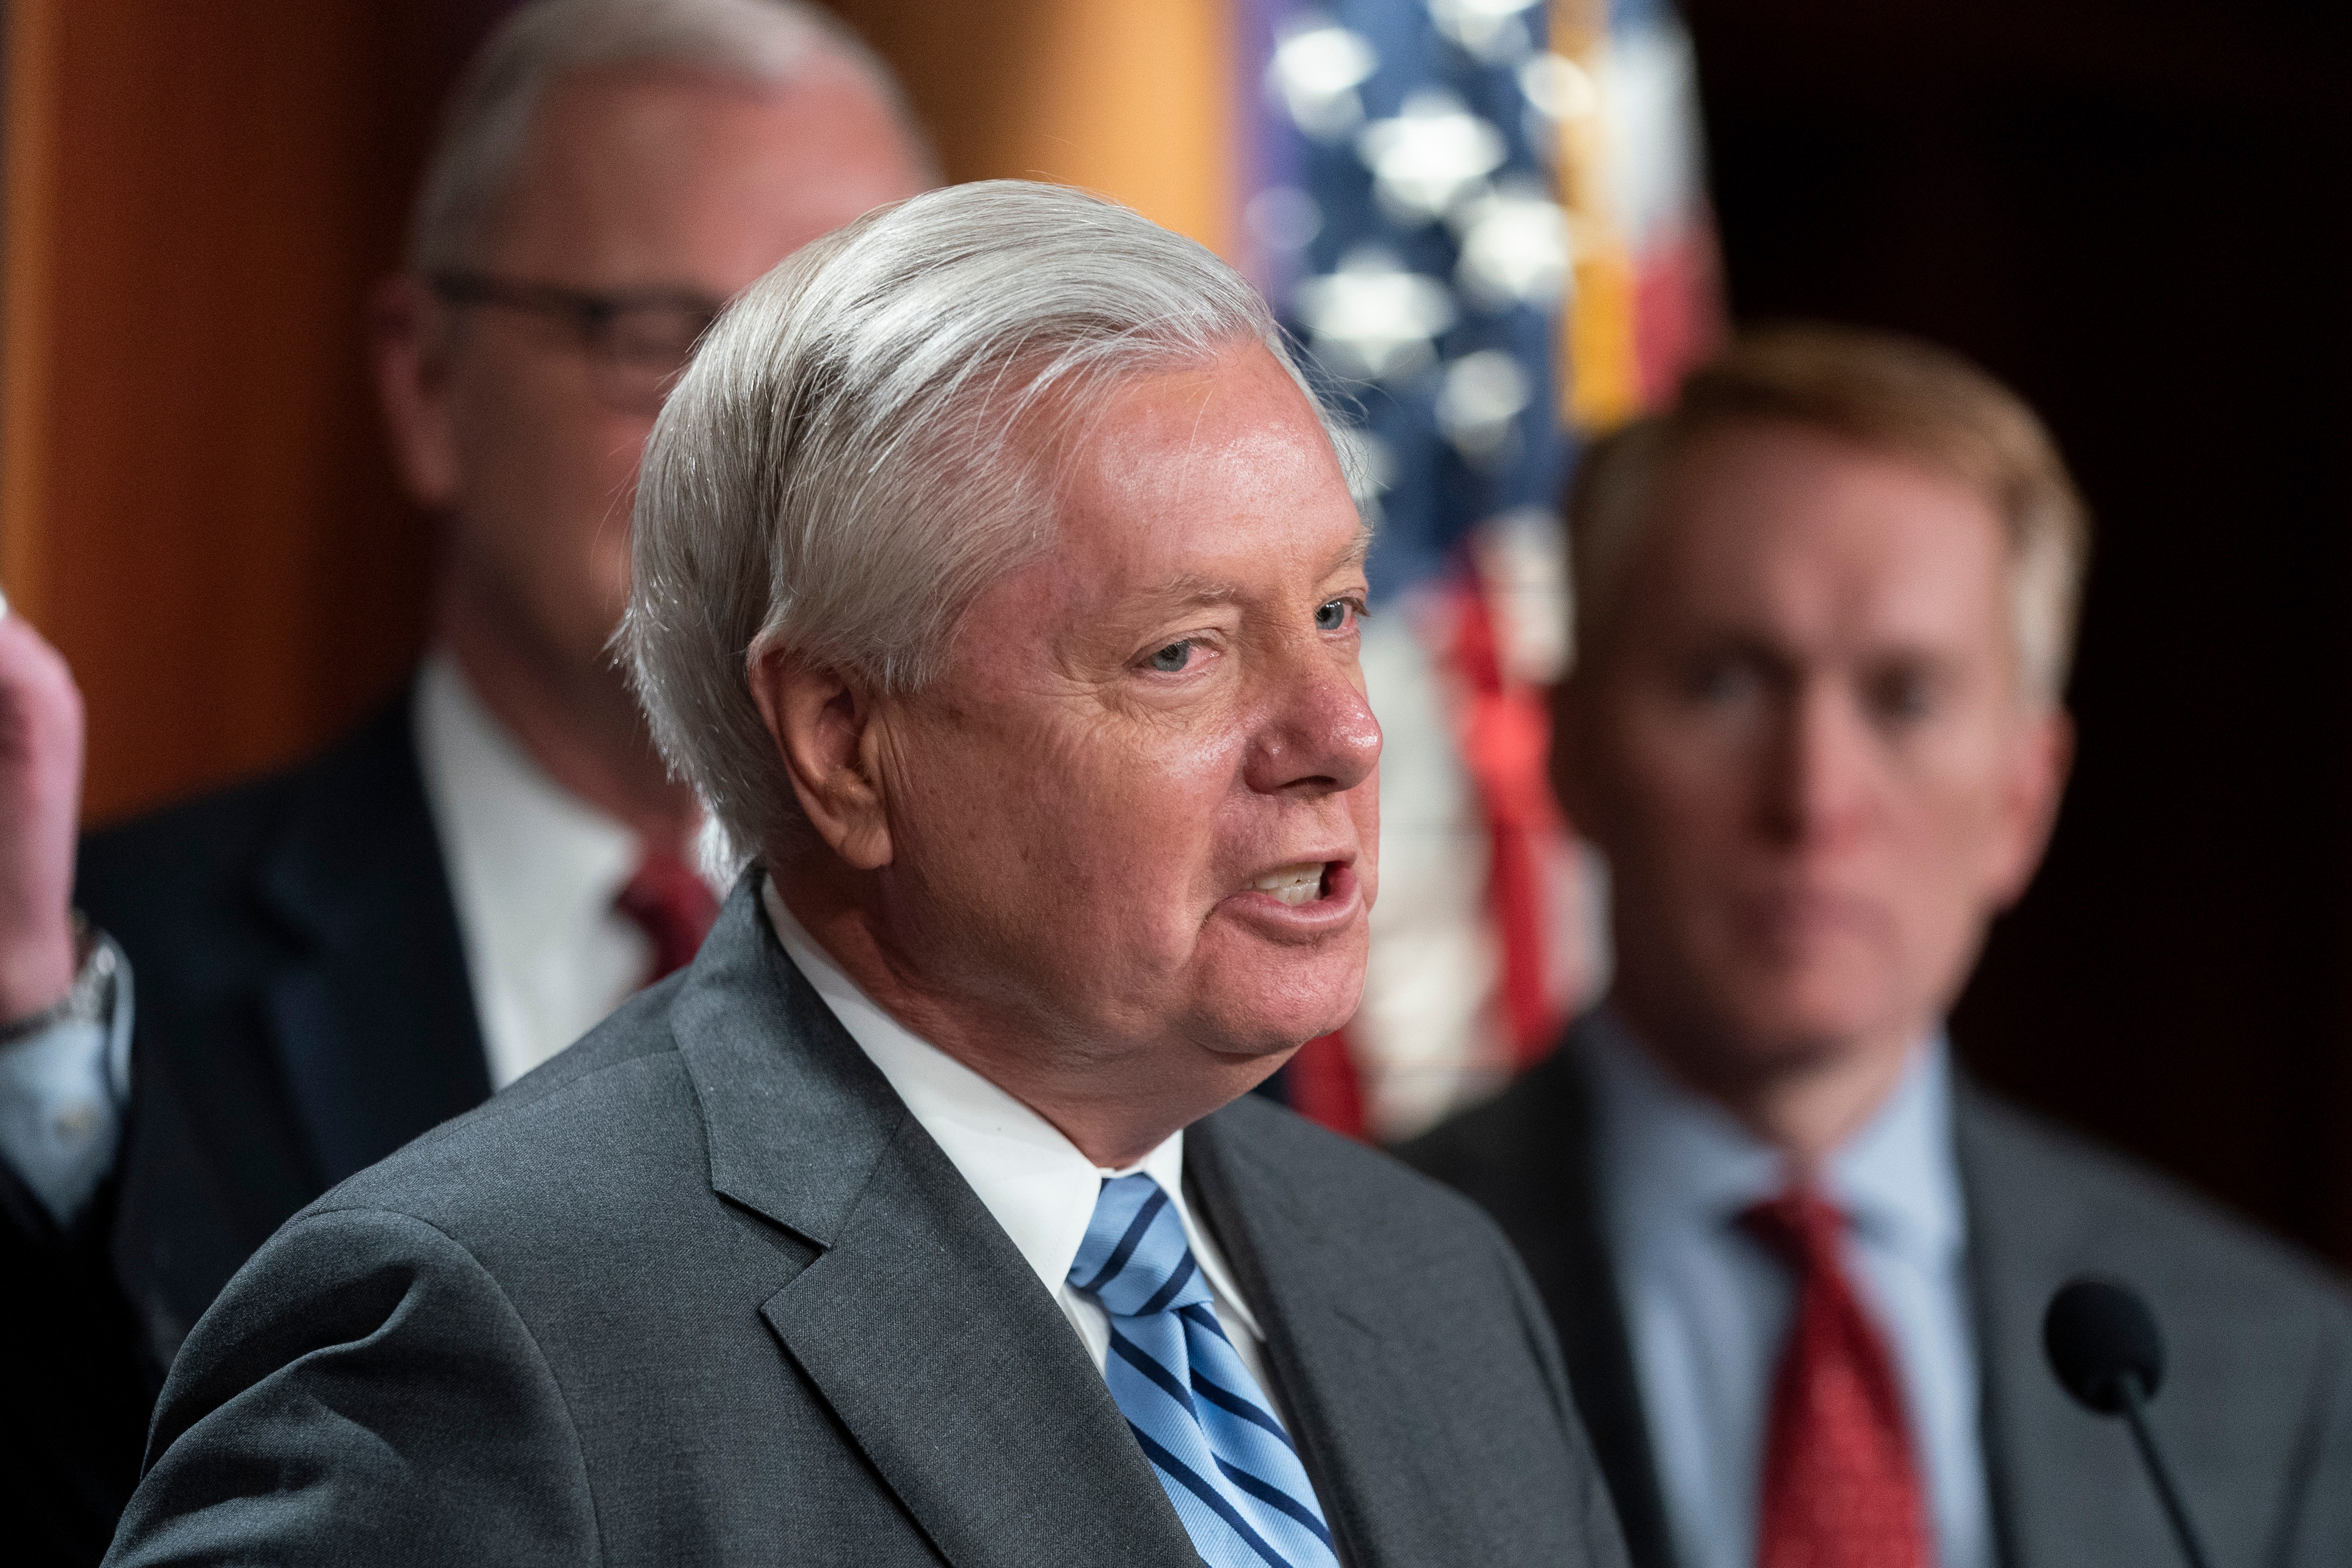 Graham rips Biden 'slow-walking' jets for Ukraine, supports no-fly zone if Russia uses chemical weapons